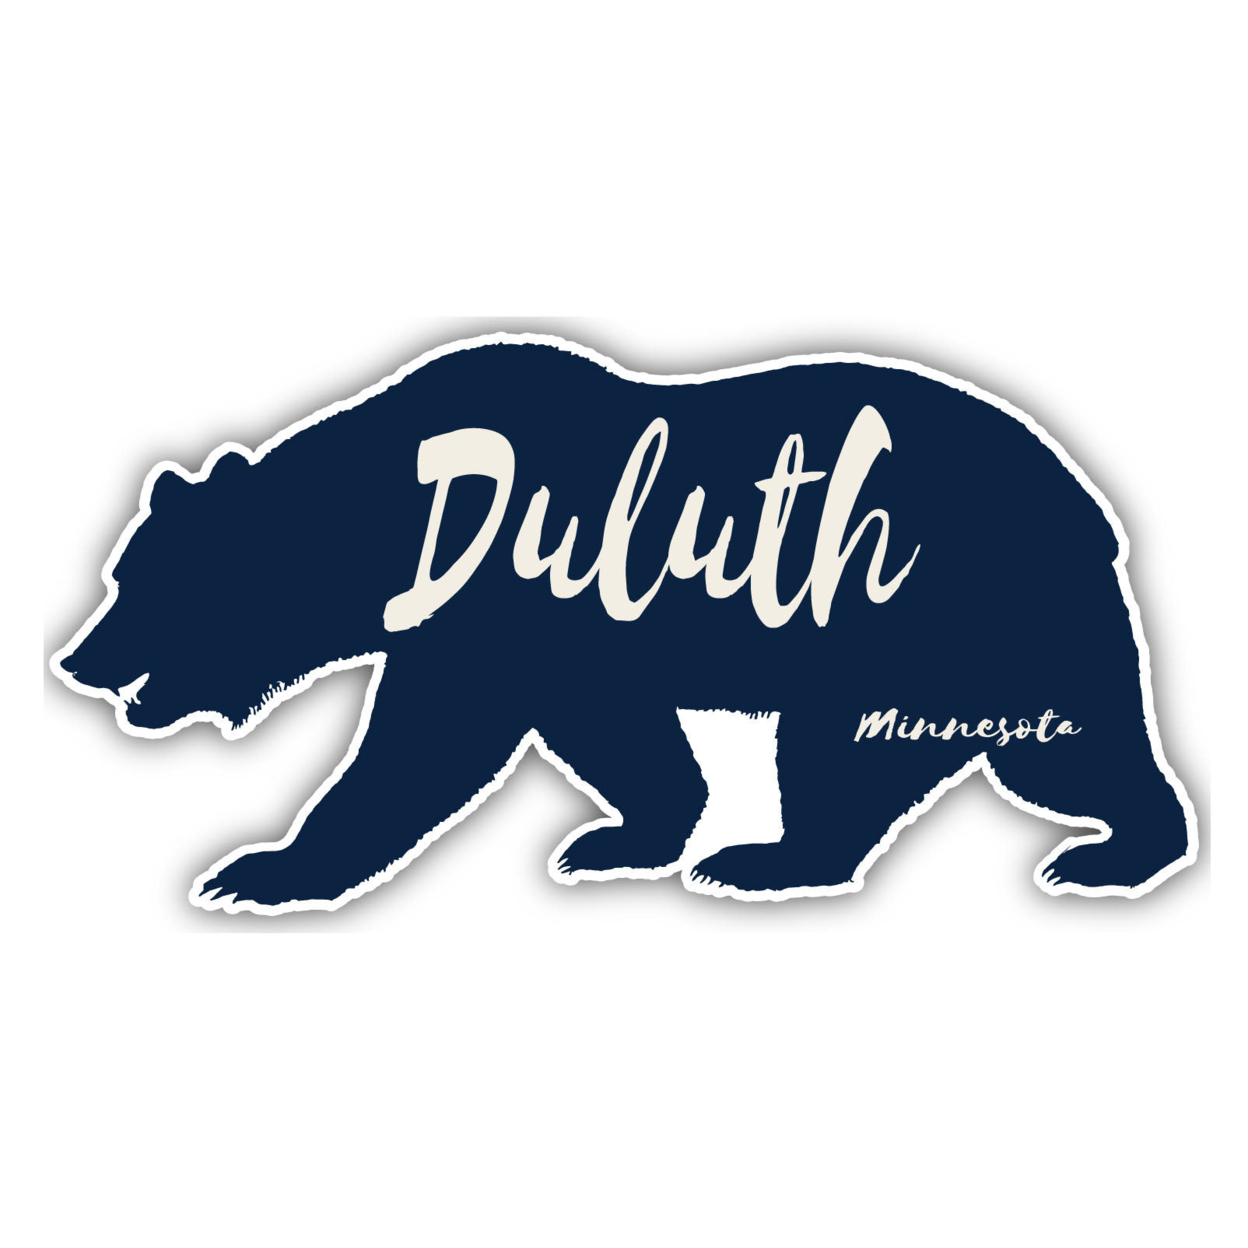 Duluth Minnesota Souvenir Decorative Stickers (Choose Theme And Size) - 4-Pack, 10-Inch, Adventures Awaits